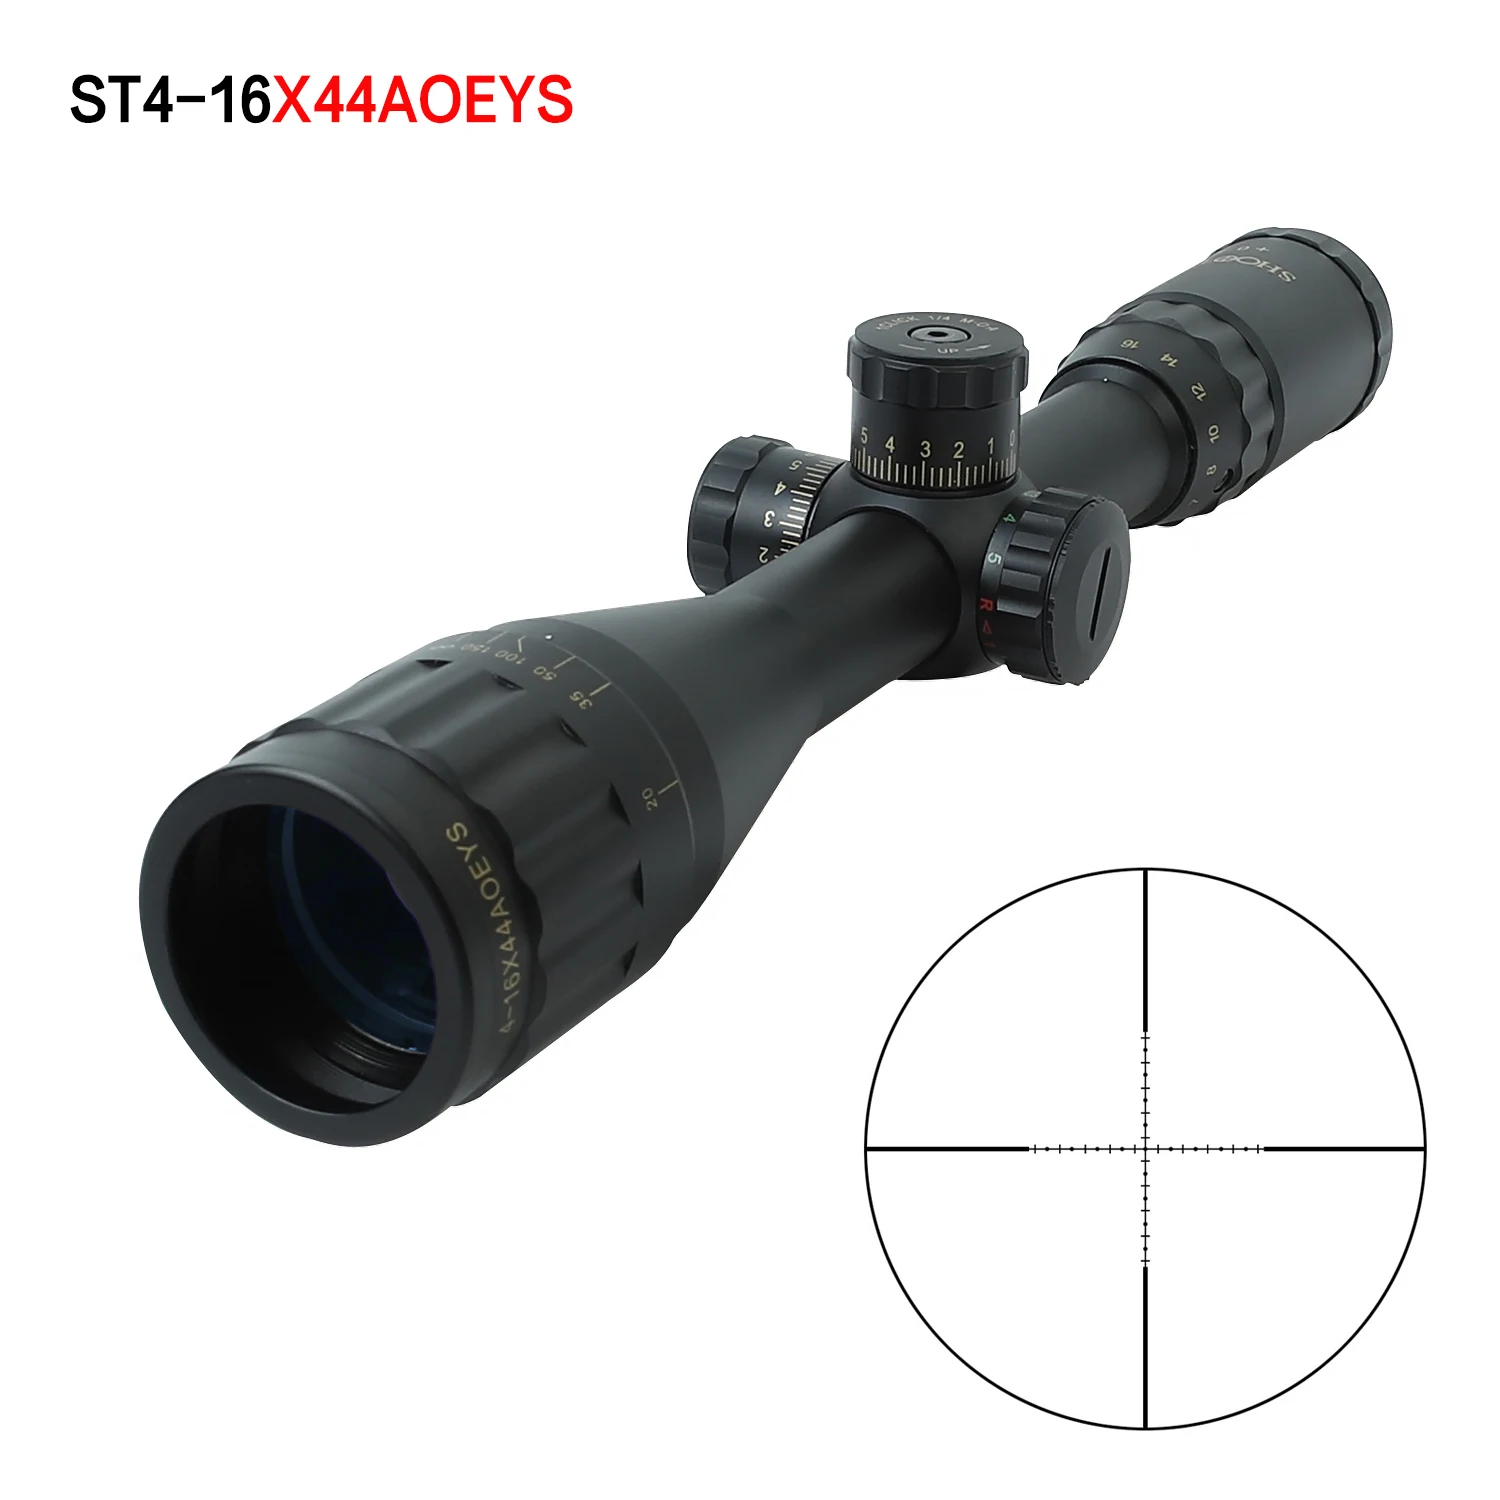 4-16x44 AOE Long Range Riflescope Optic Sight Rifle Scope Green Red Illuminated Hunting Scopes TACTIC airsoft accessories